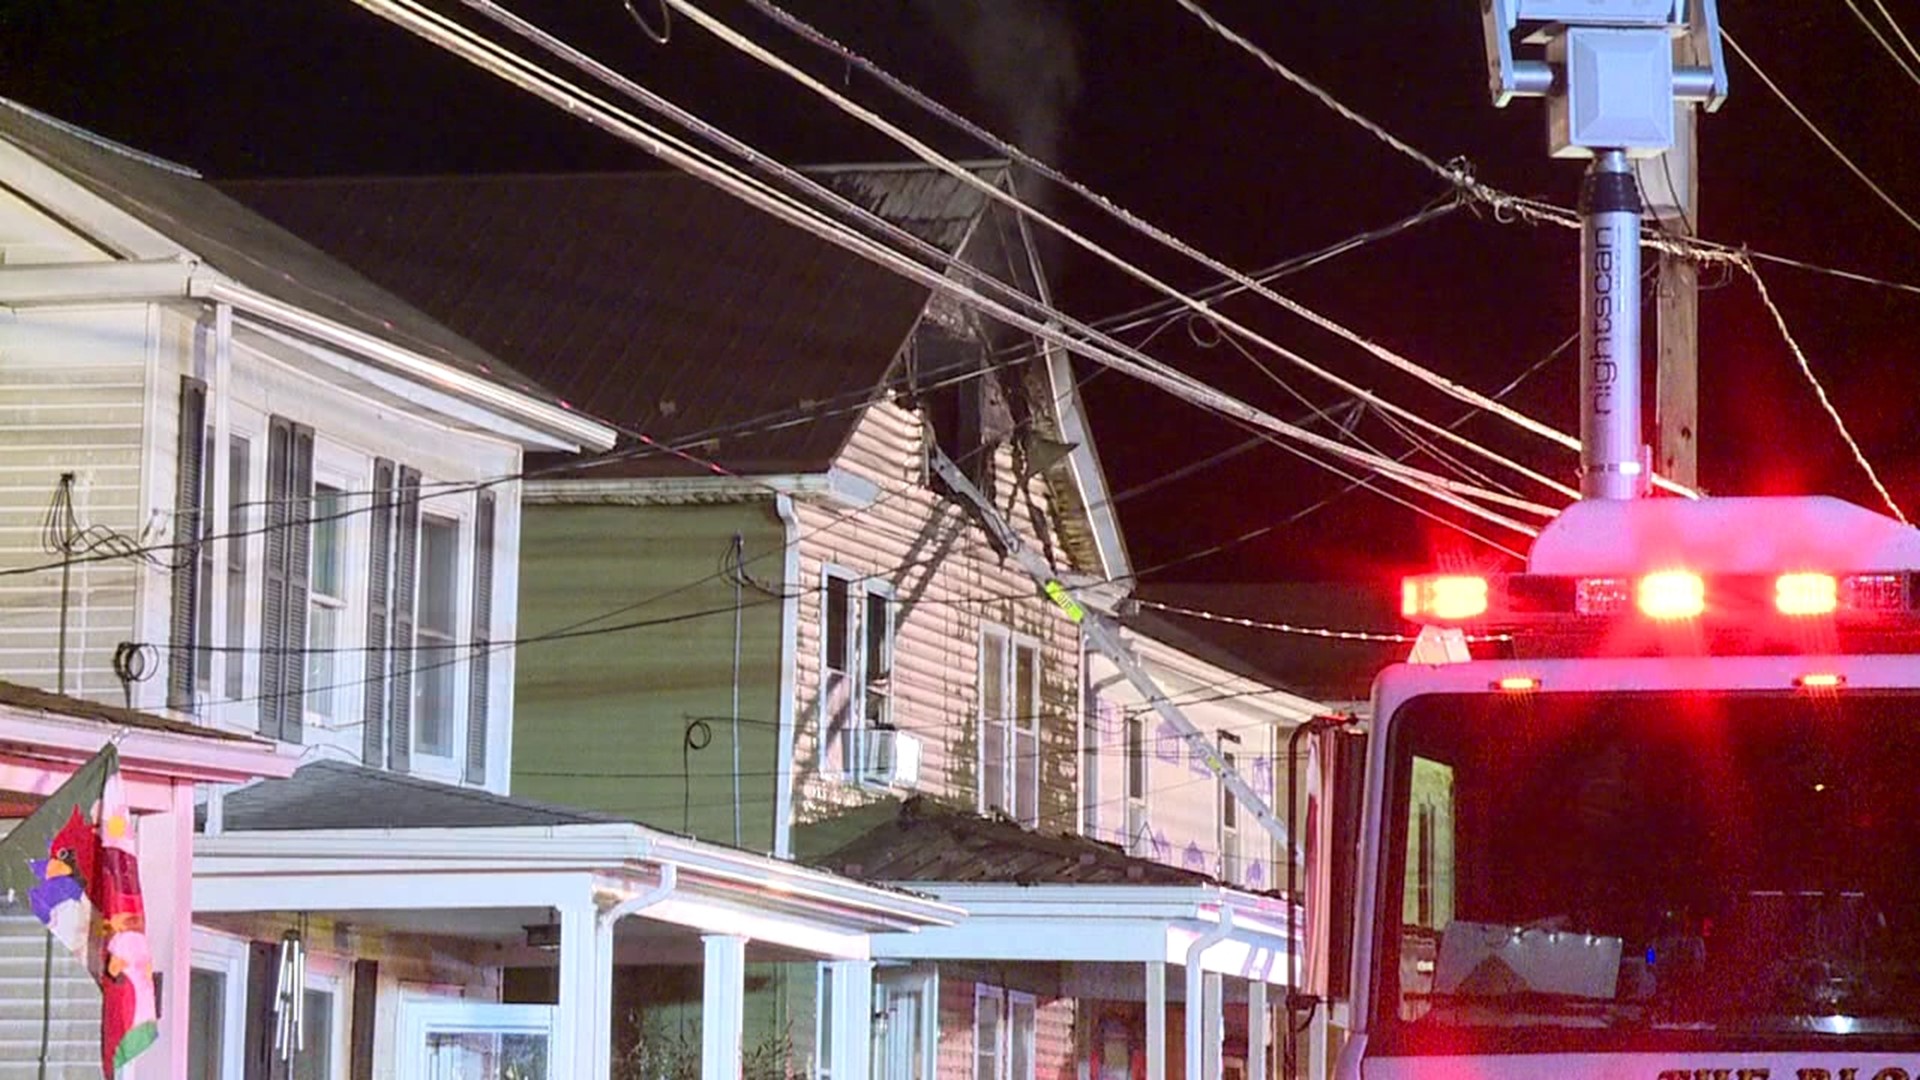 Crews were dispatched around 4:30 a.m. Saturday for a fire at a home along West Mahoning Street in the borough.